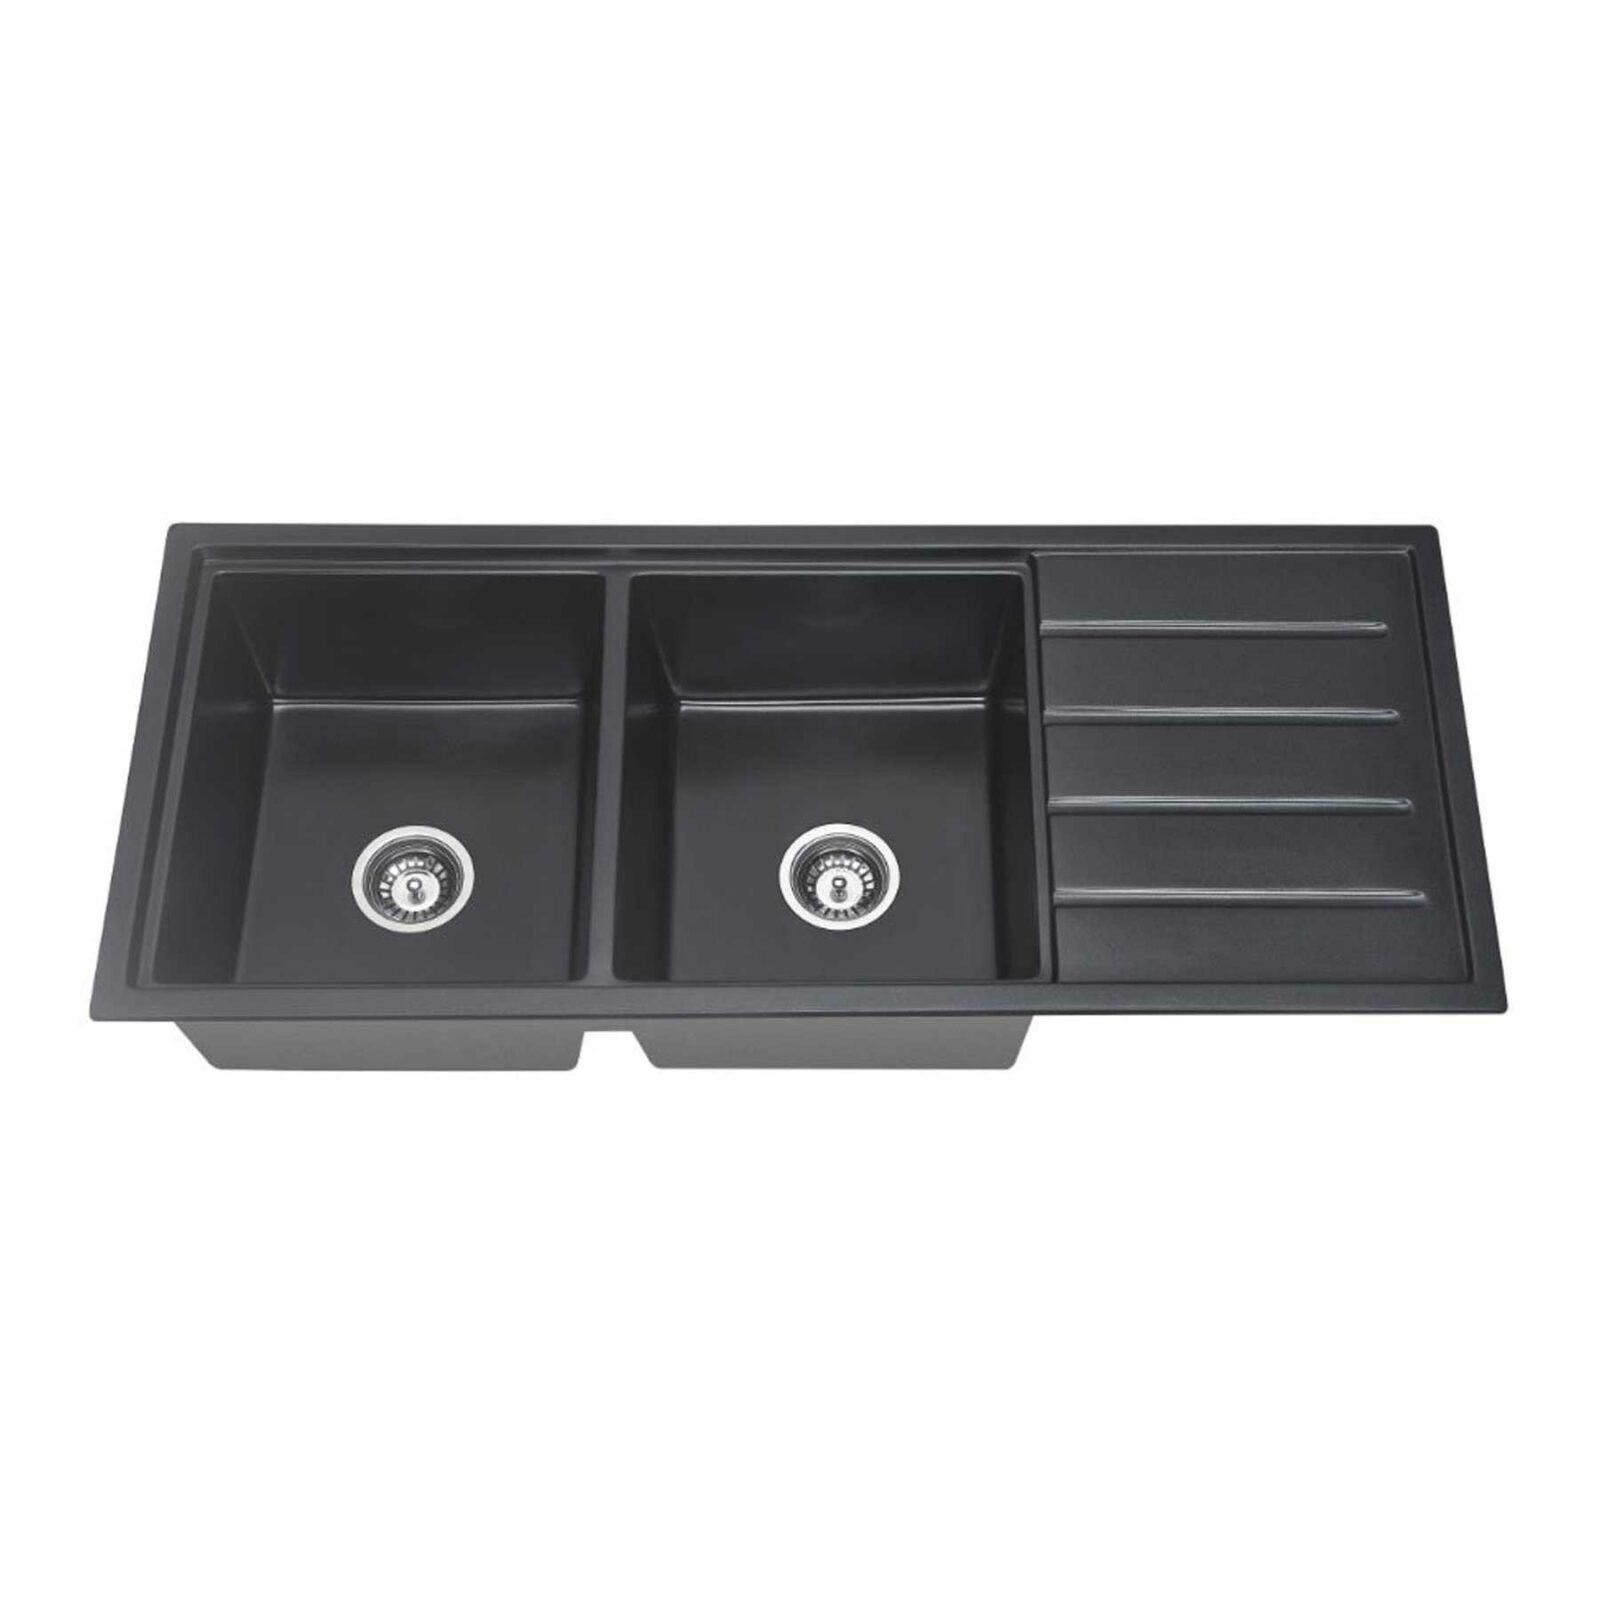 ARCKO GRANITE 1160mm Double Bowl Sink with Drainer